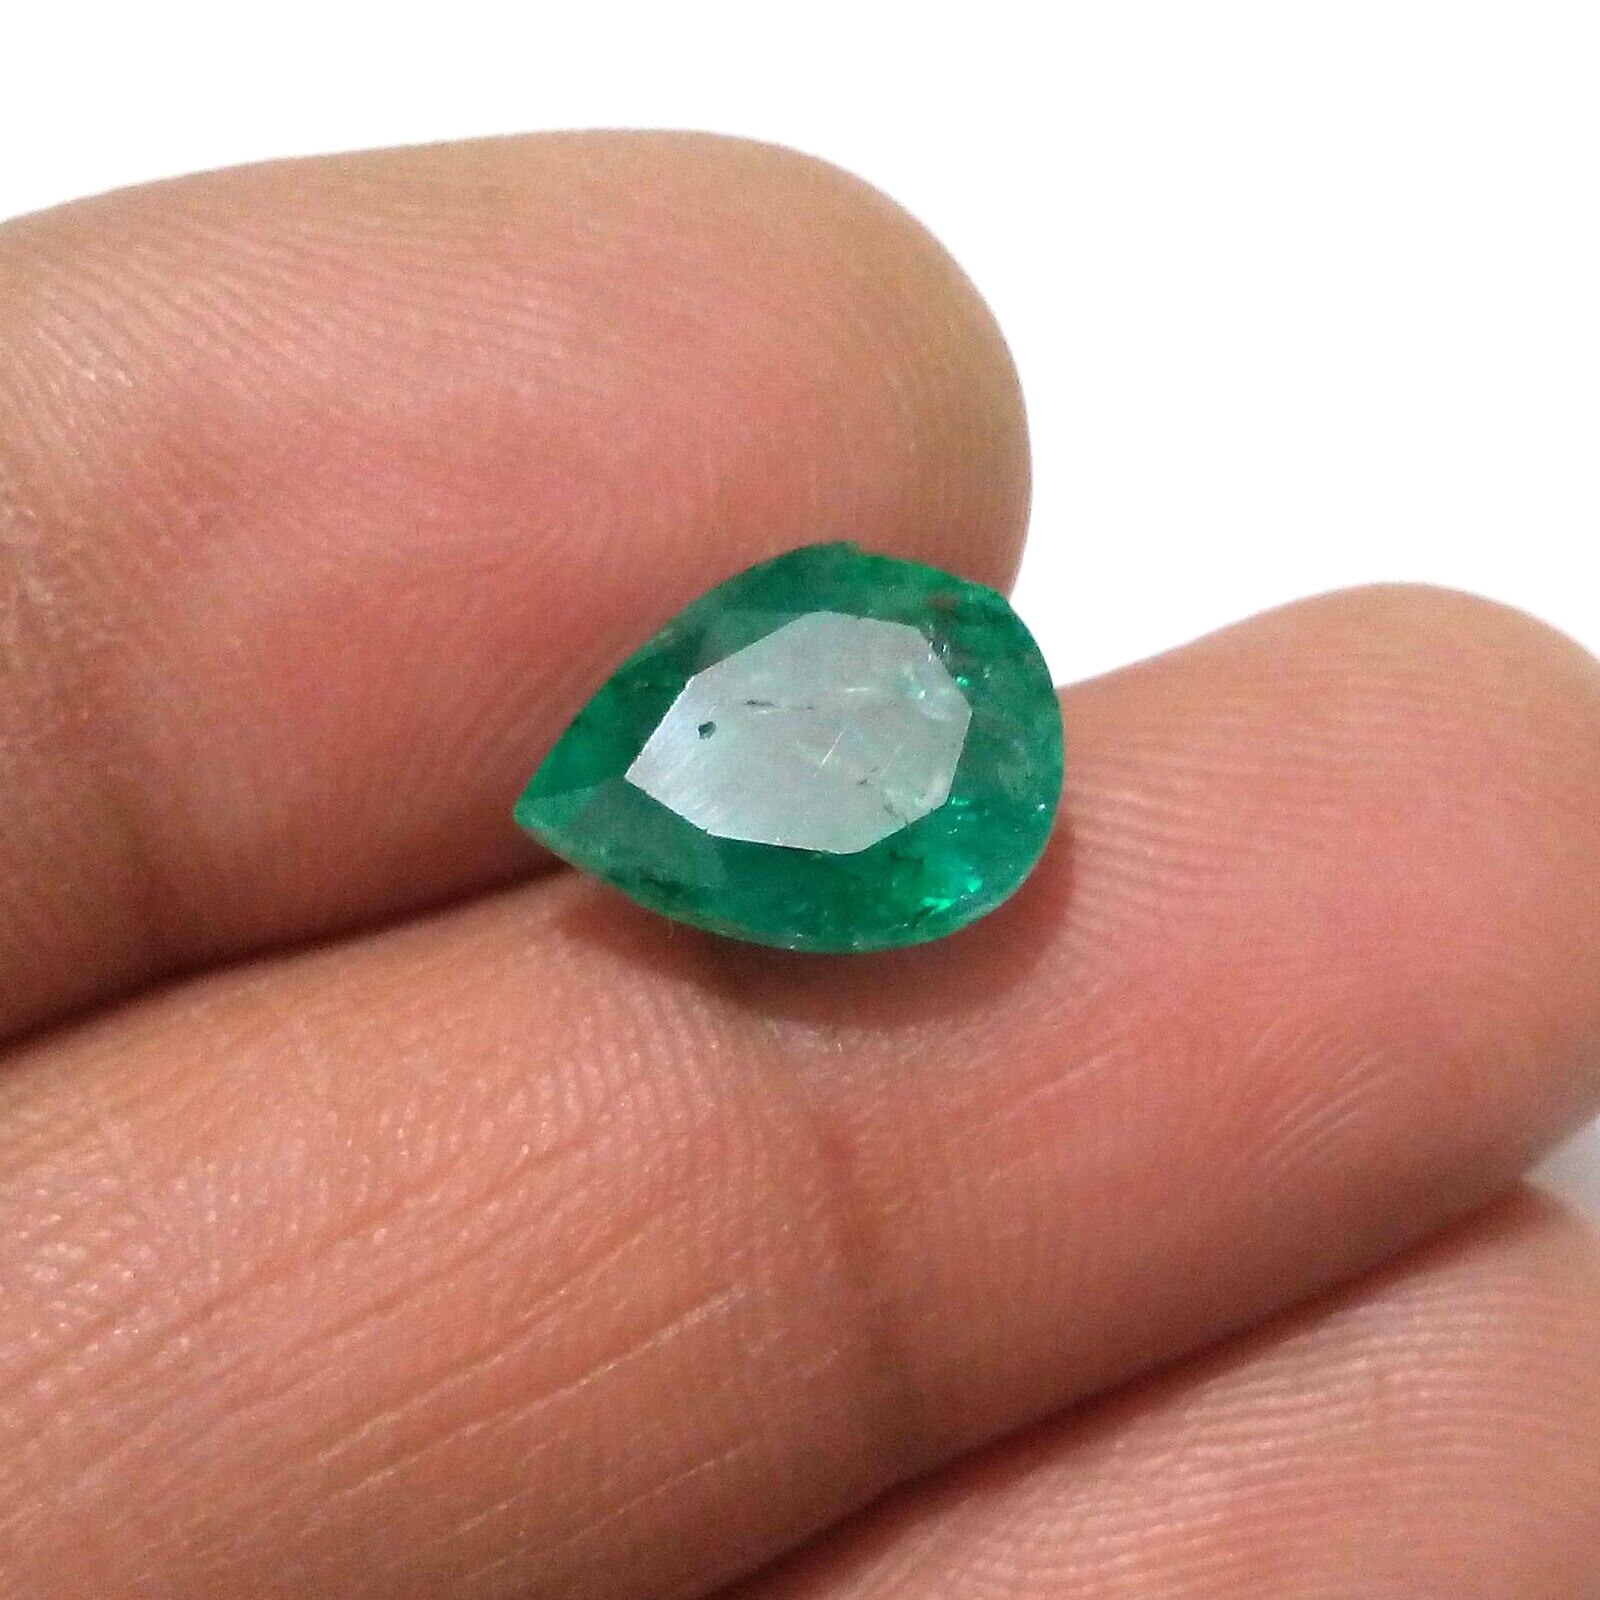 Attractive Zambian Emerald Faceted Pear Shape 4.15 Crt Emerald Loose Gemstone